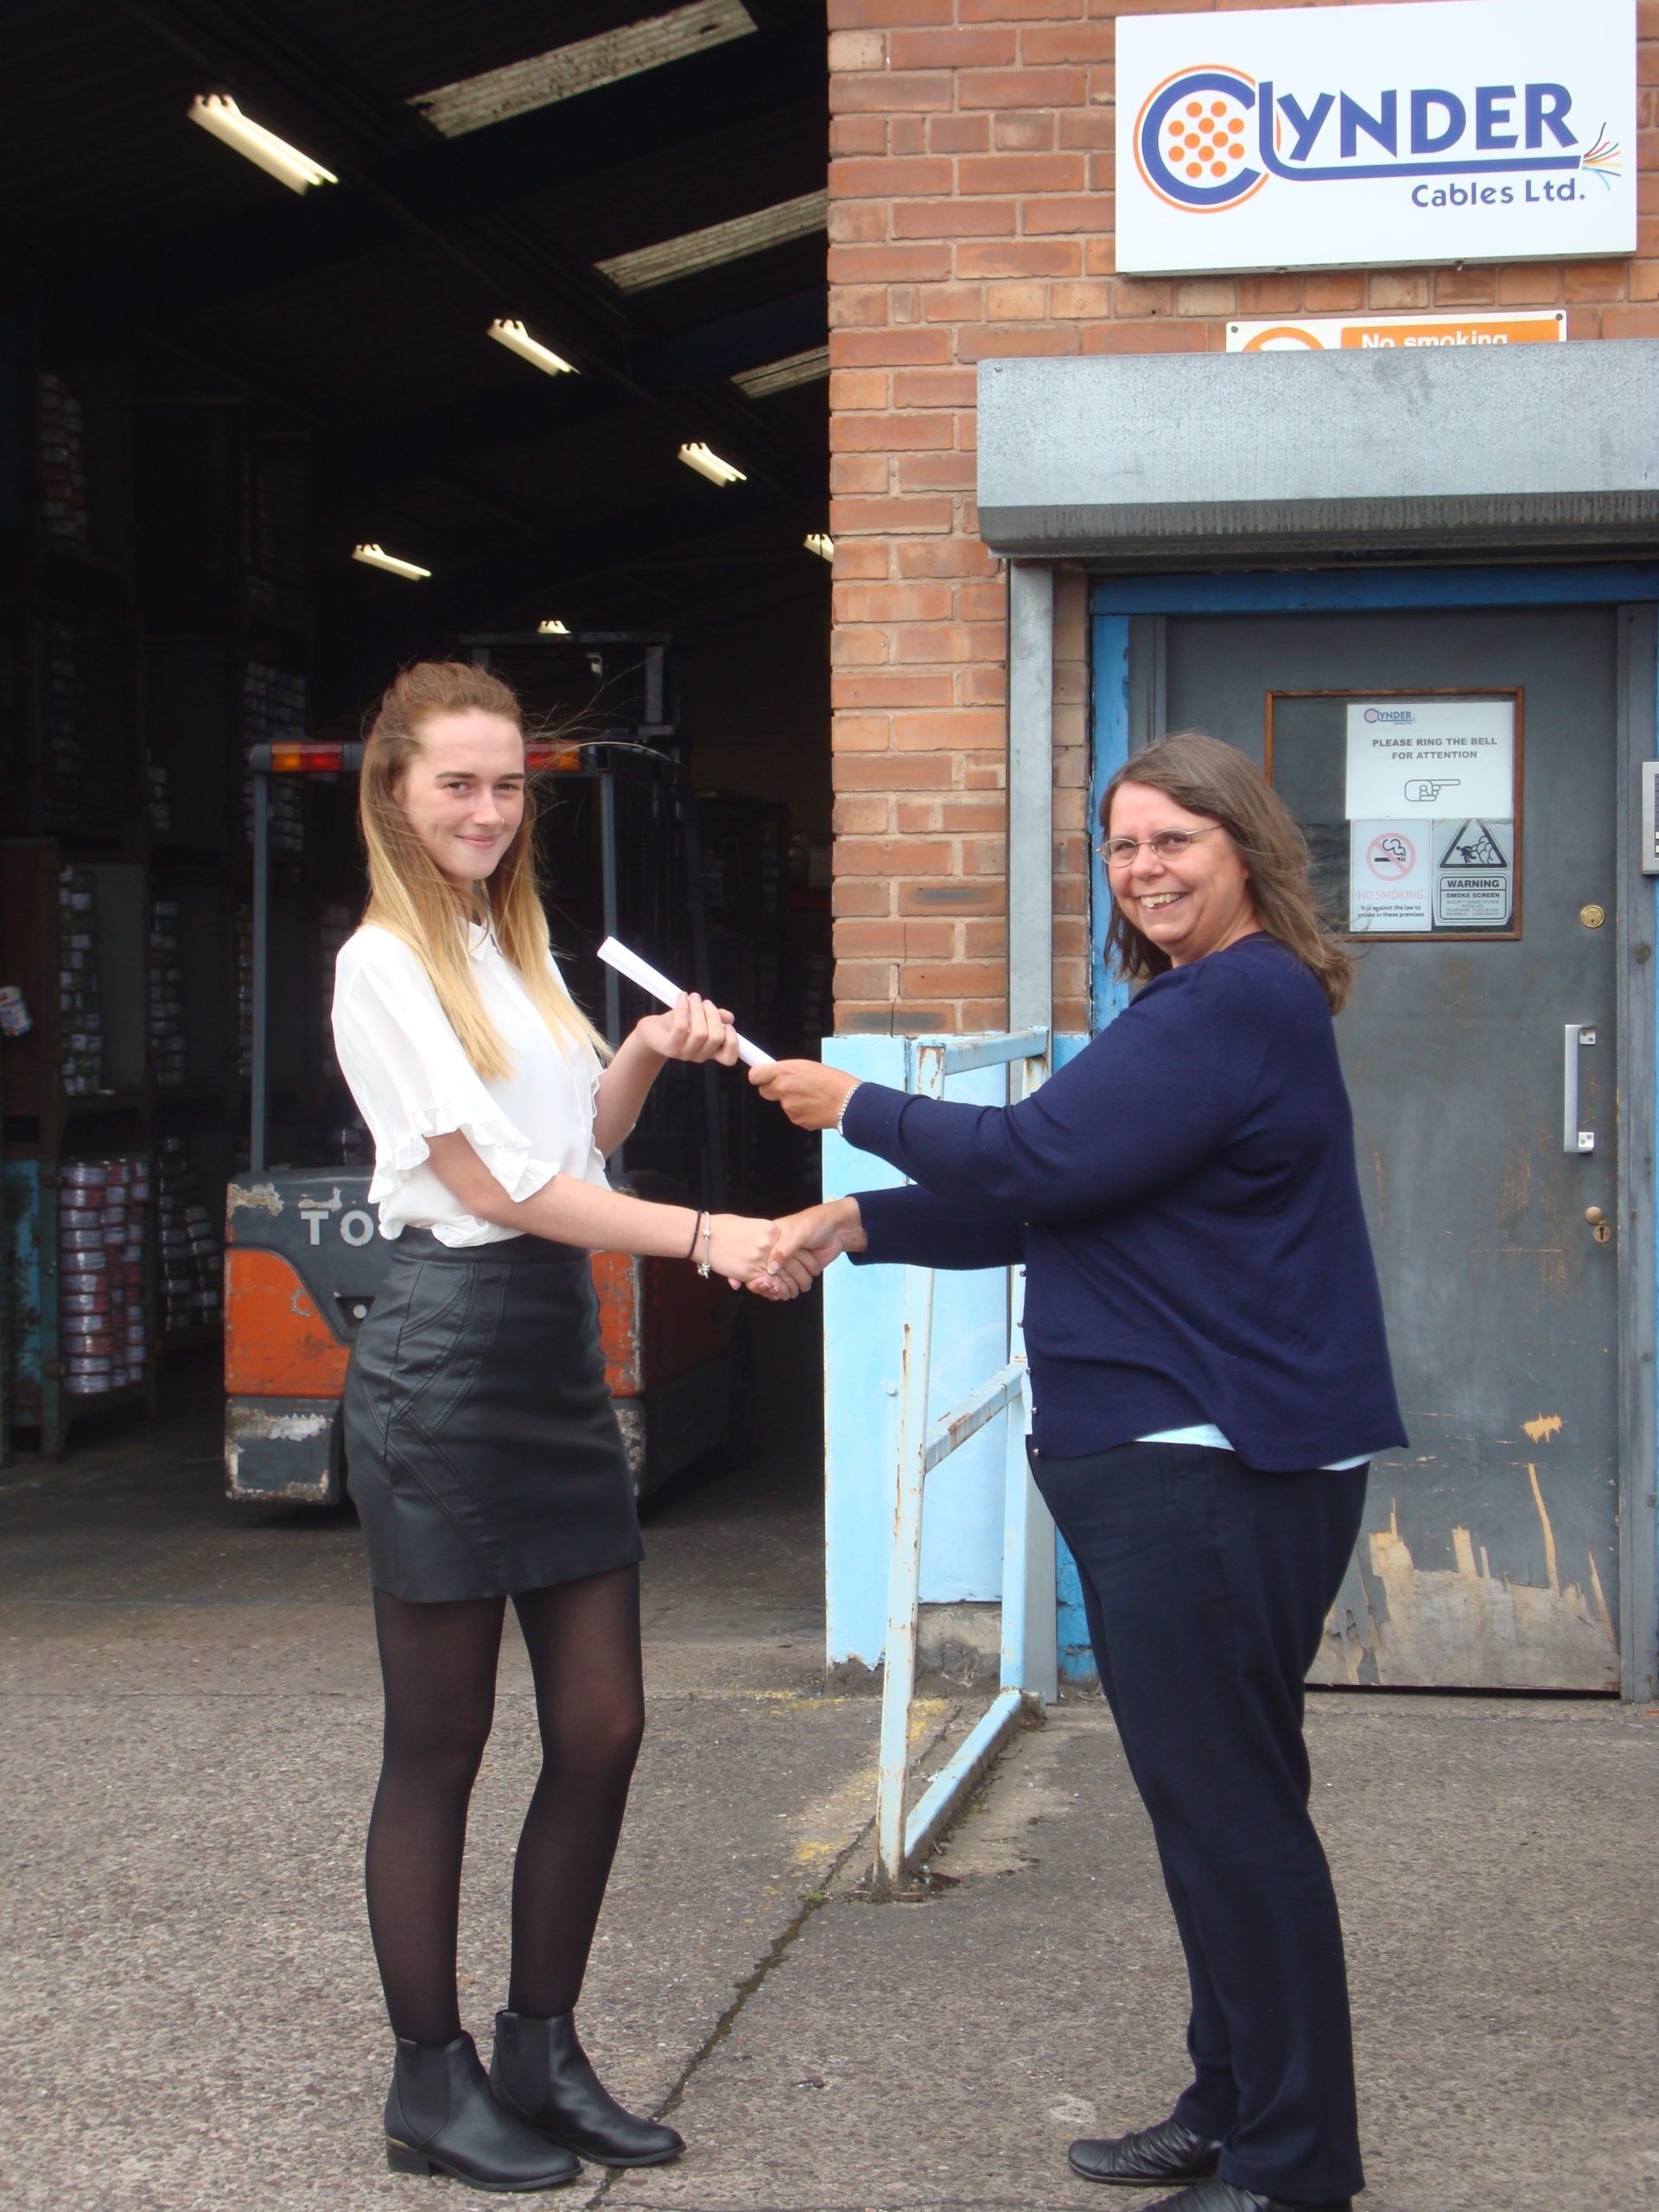 a manager handing a sales assistant a certificate in front of the clynder cables warehouse